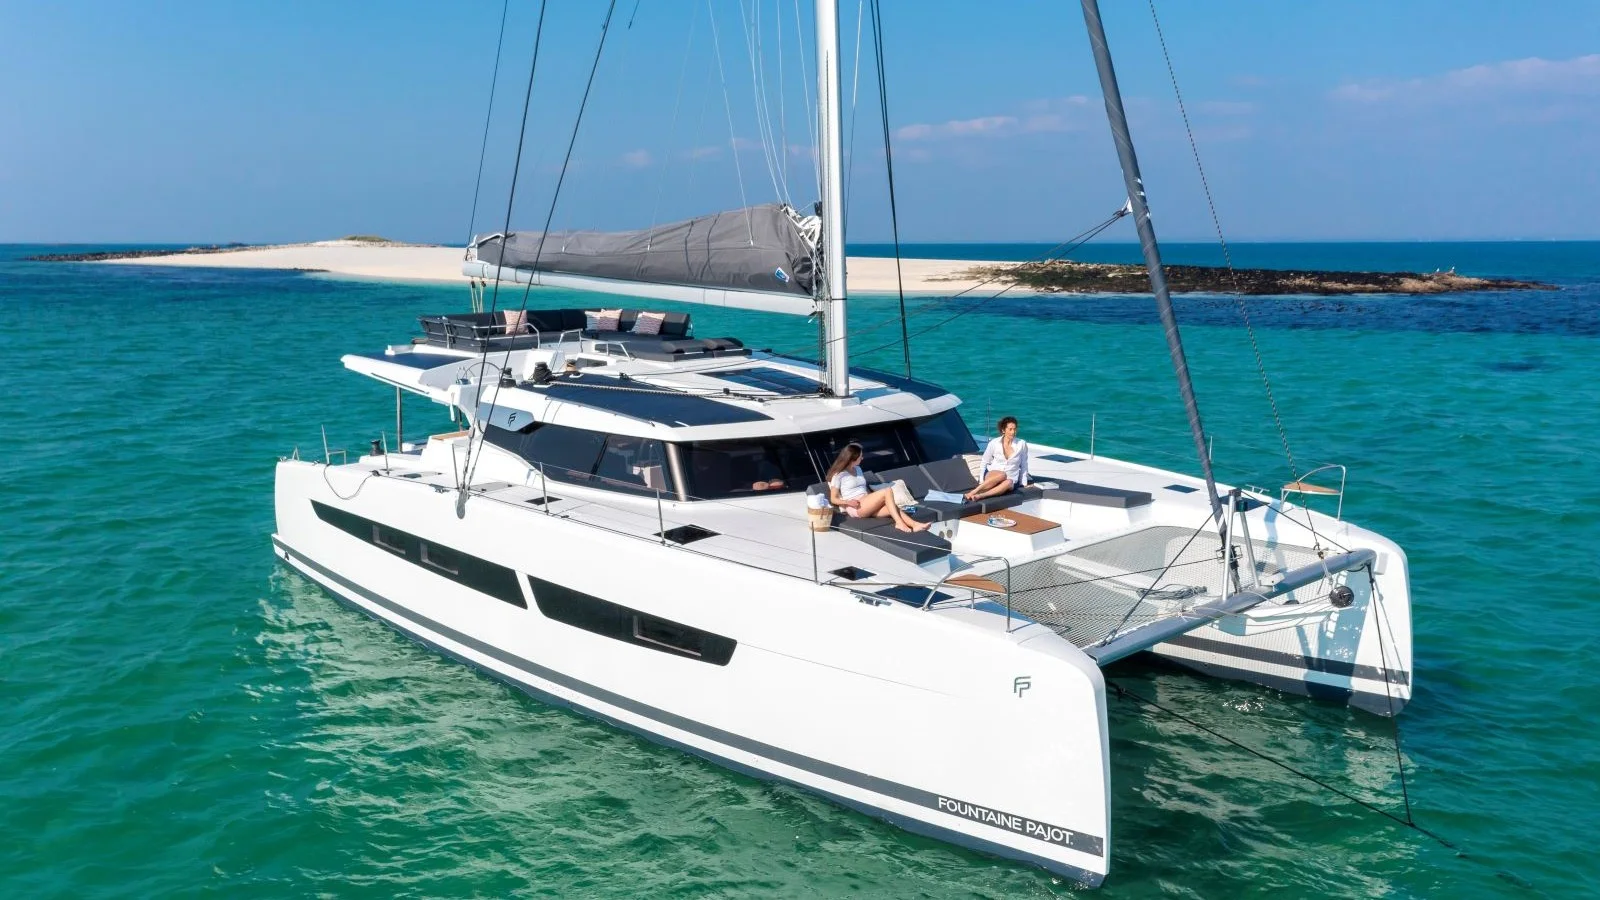 Catamarans are just meant for the areas where there lots of islands and shallow waters